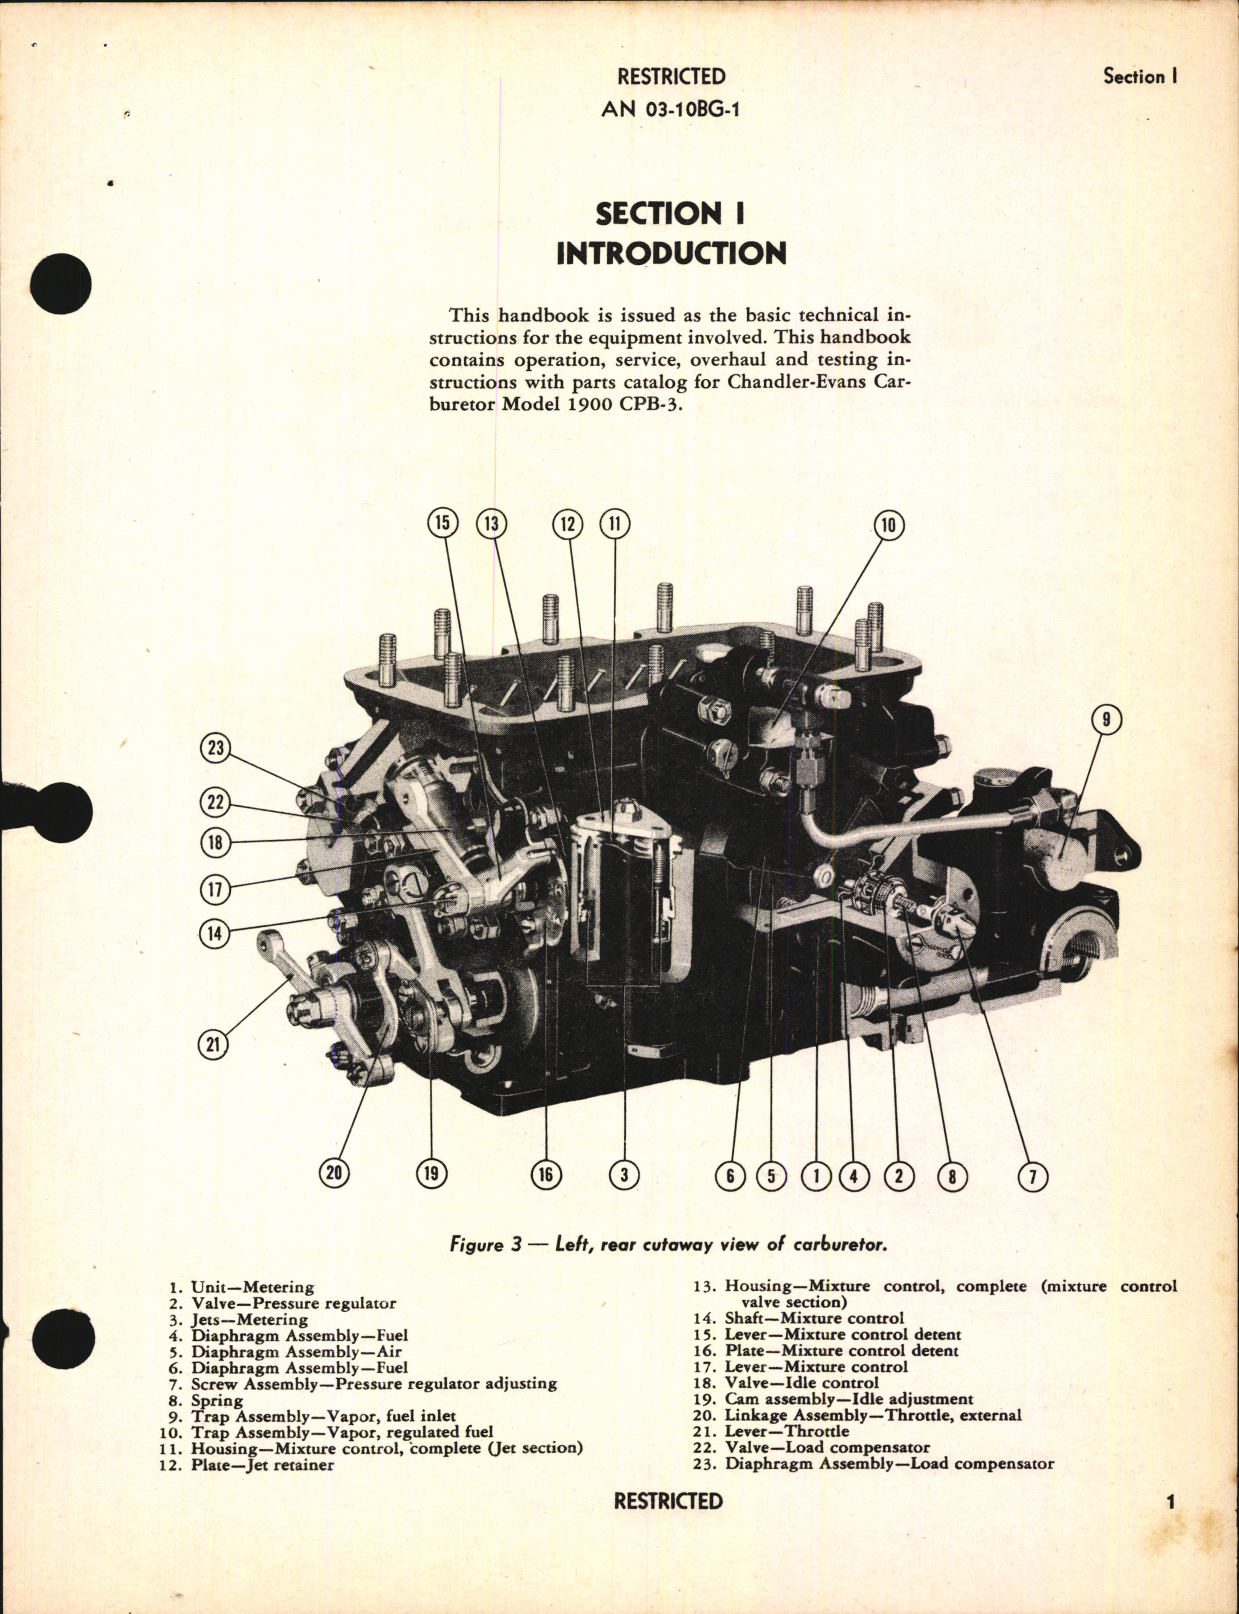 Sample page 7 from AirCorps Library document: Handbook of Instructions with Parts Catalog for Injection Carburetor Model 1900CPB-3